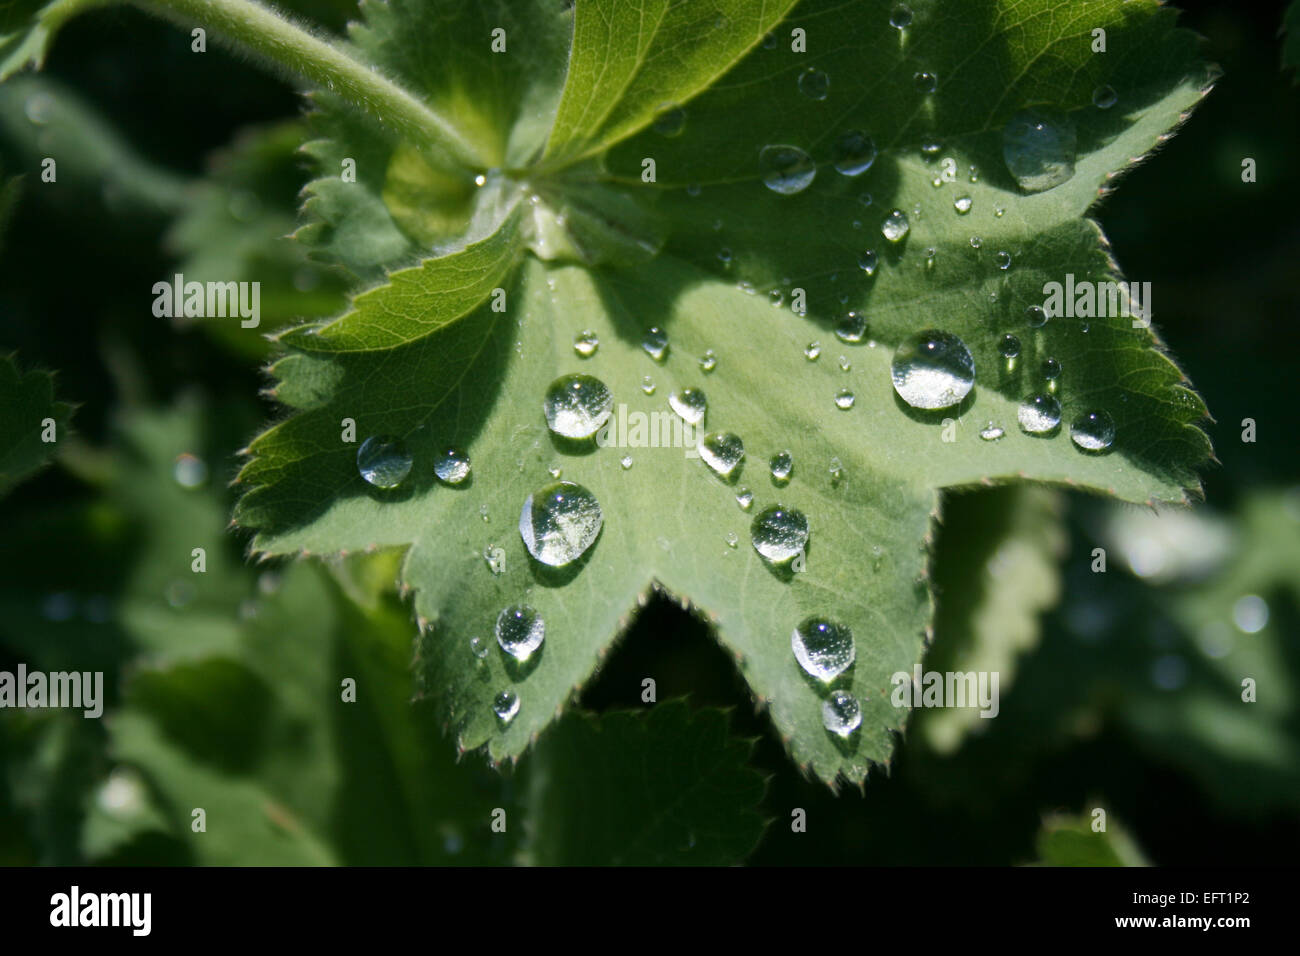 ladys mantle with waterdrops Stock Photo